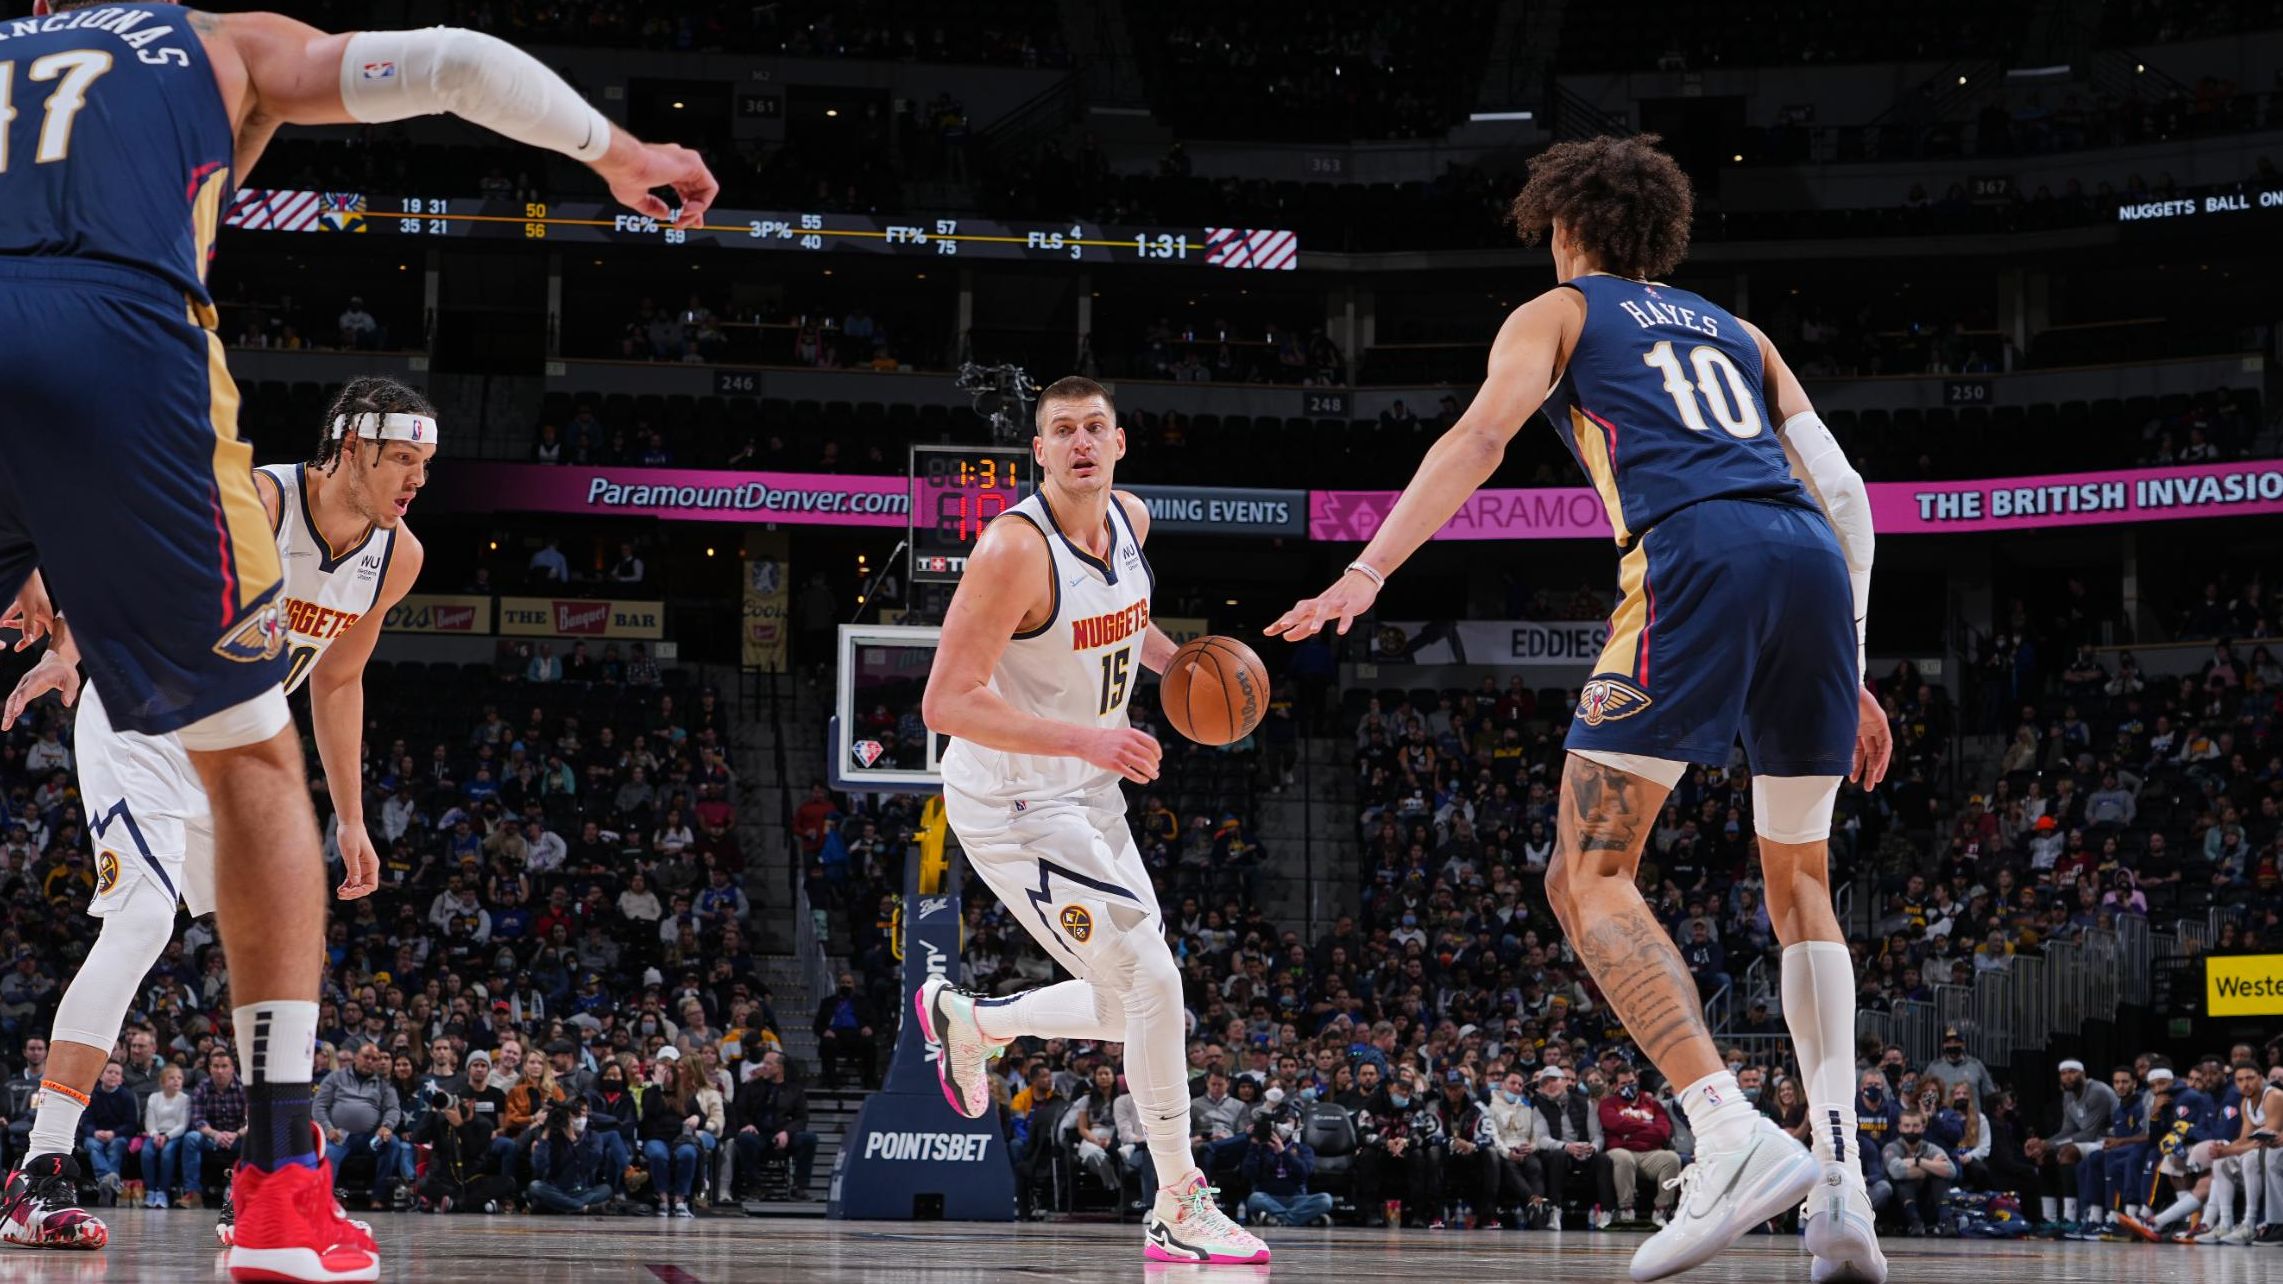 Jokic is the NBA's reigning MVP and his performance had his teammates raving.